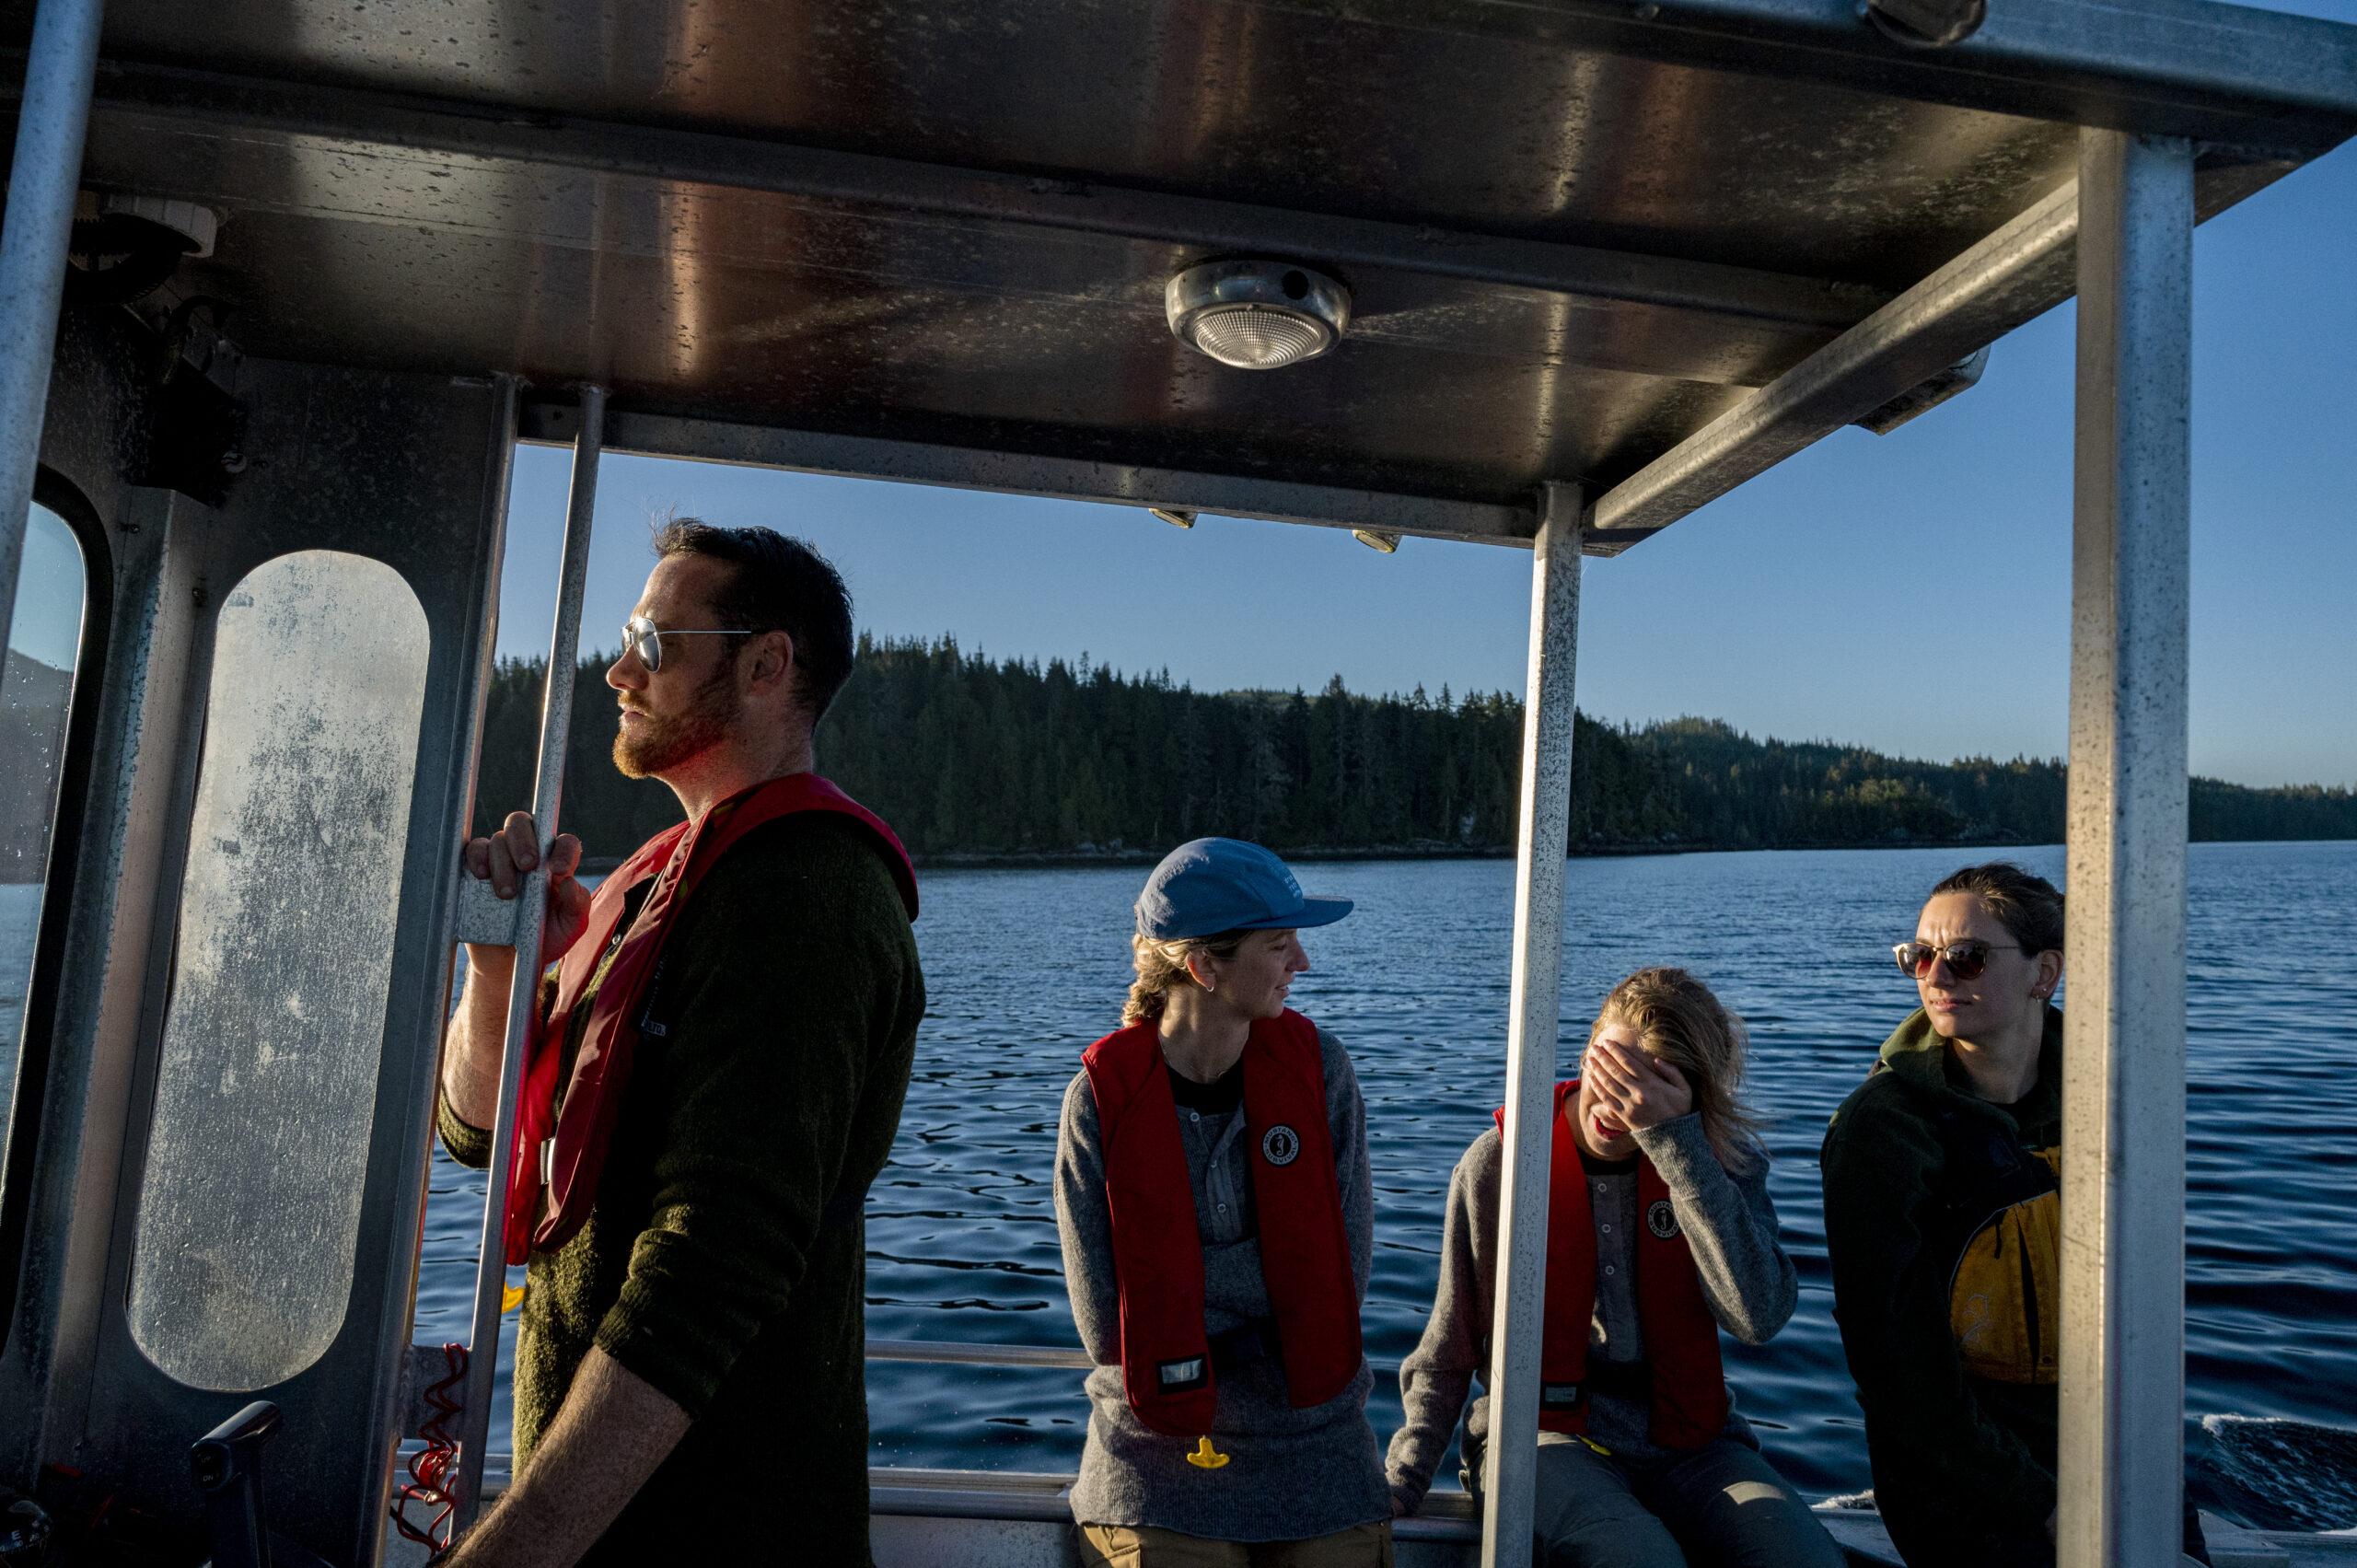 Marine ecologist Kieran Cox drives the research boat as his colleagues Bridget Maher, Claire Attridge and Em Lim lean against the side of the boat. The ocean and forested land are seen in the background.